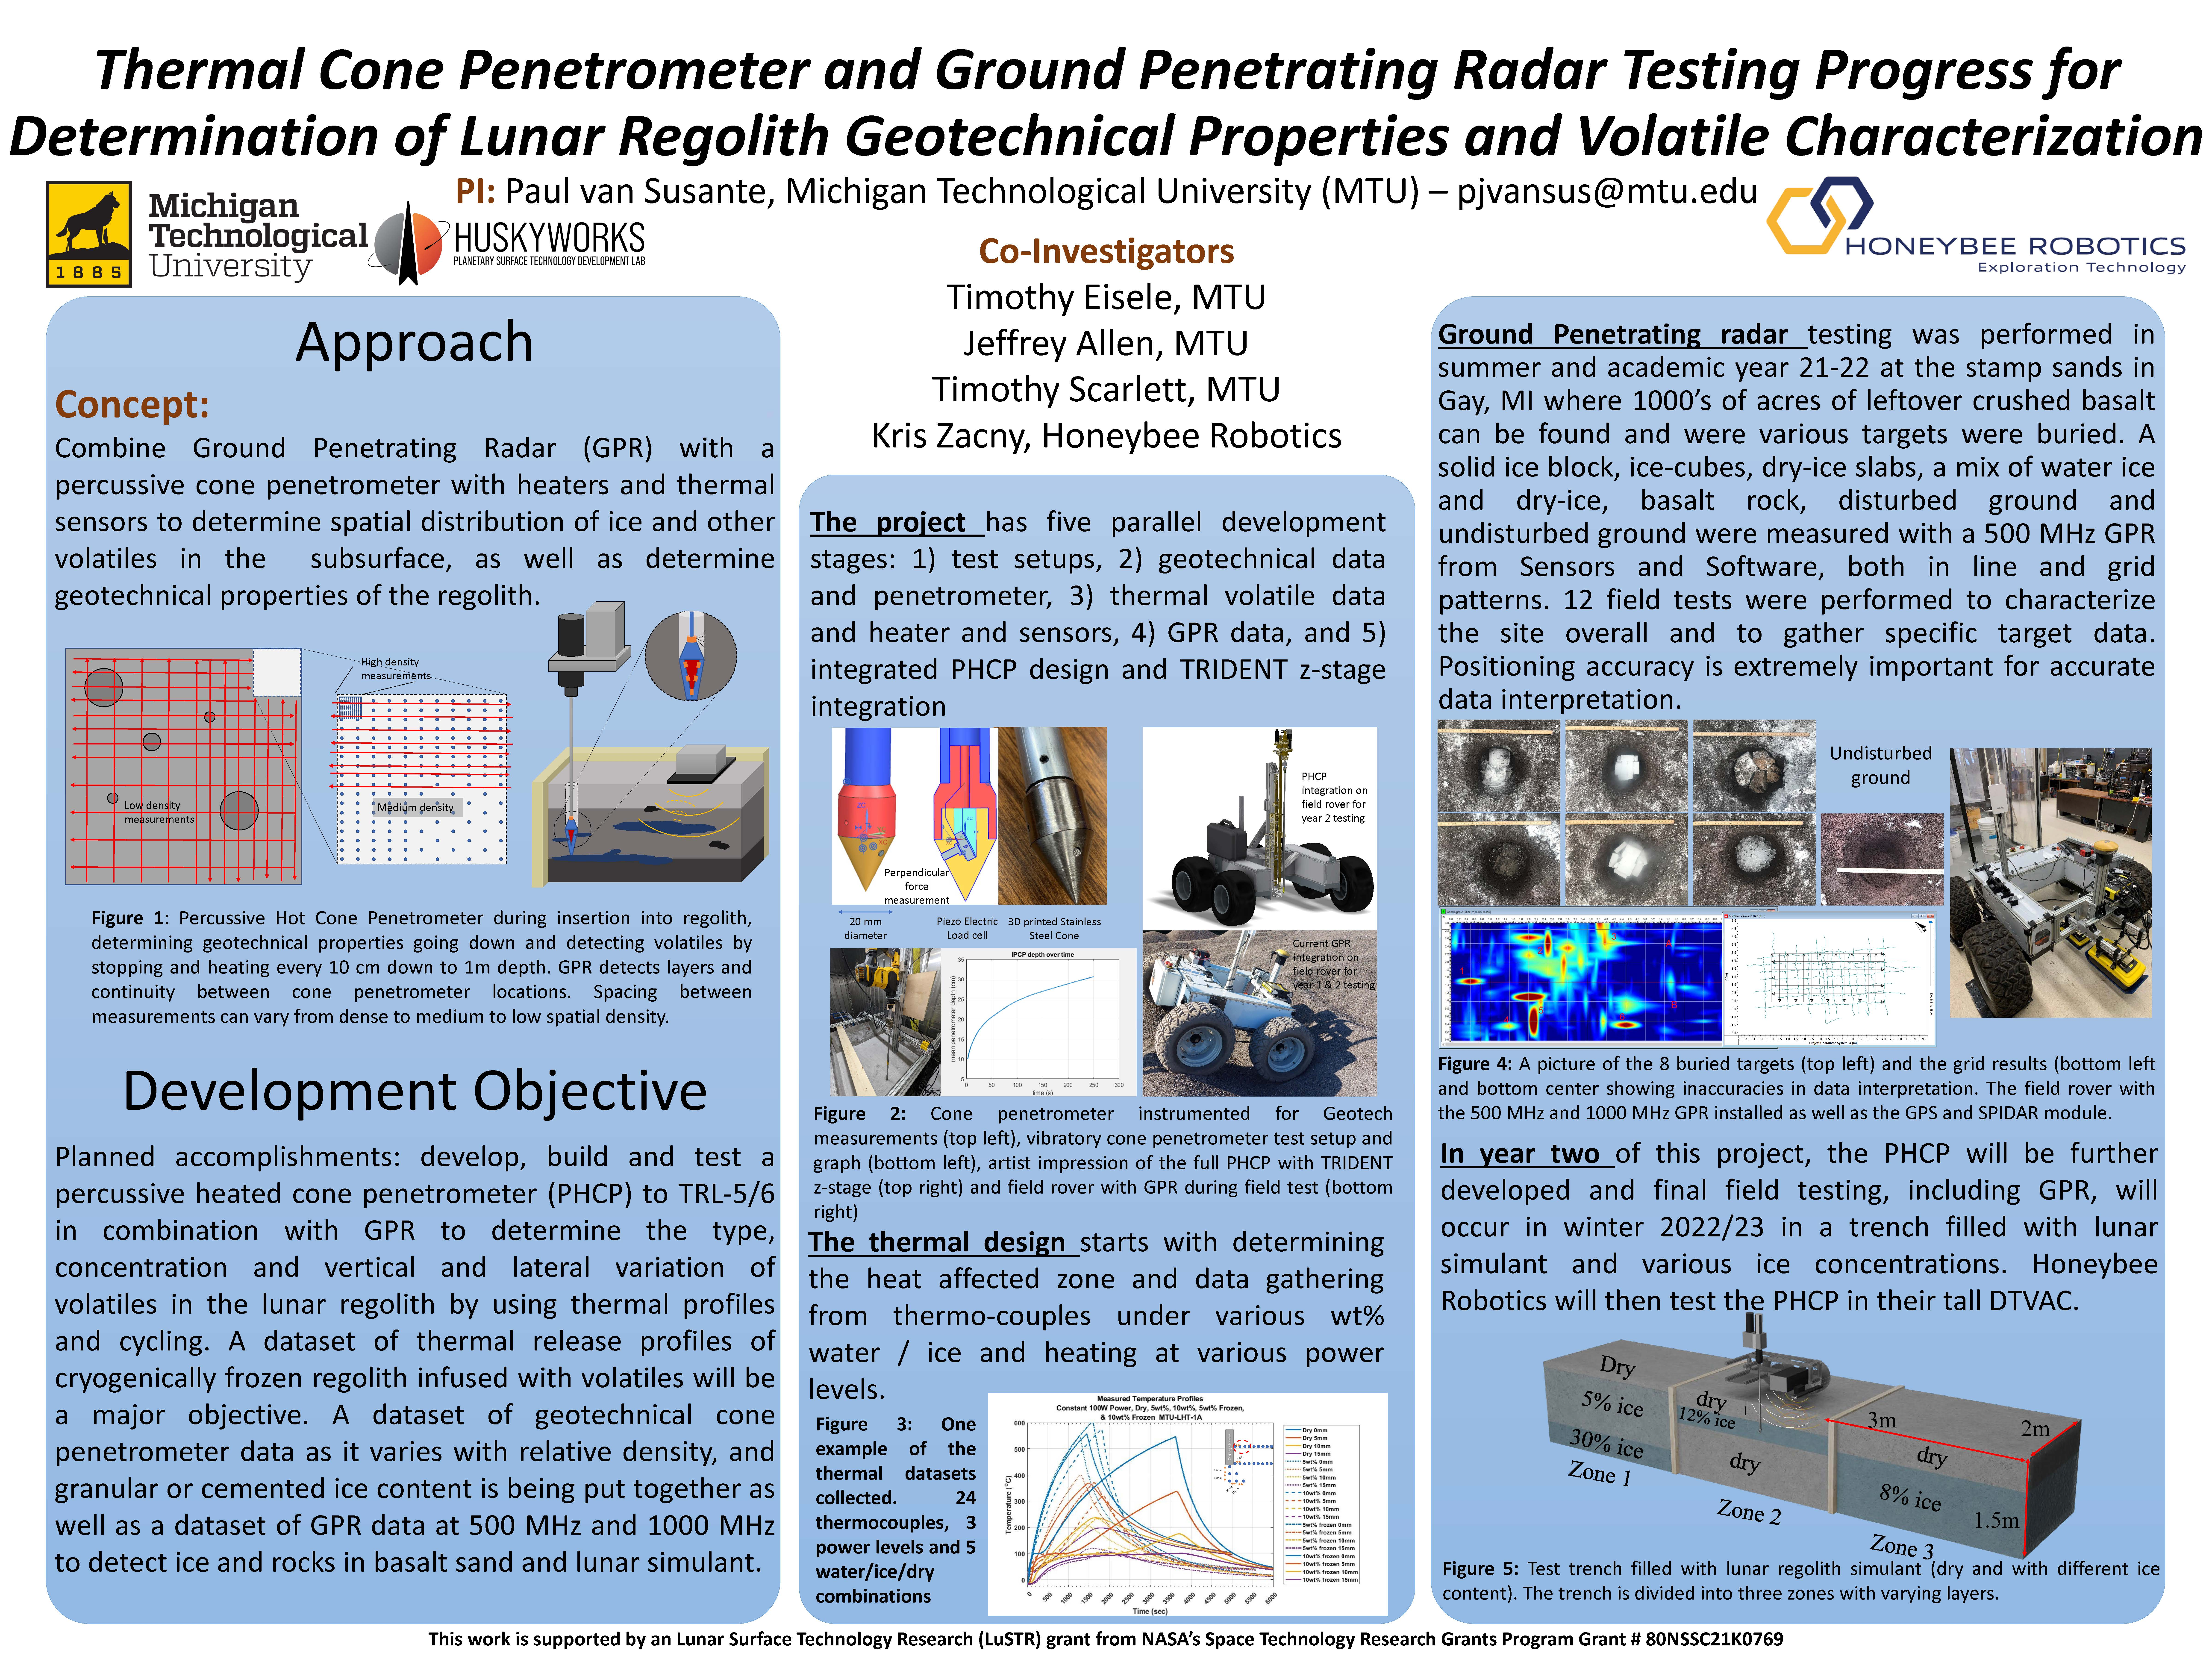 Thermal Cone Penetrometer and Ground Penetrating Radar Testing Progress for Determination of Lunar Regolith Geotechnical Properties and Volatile Characterization